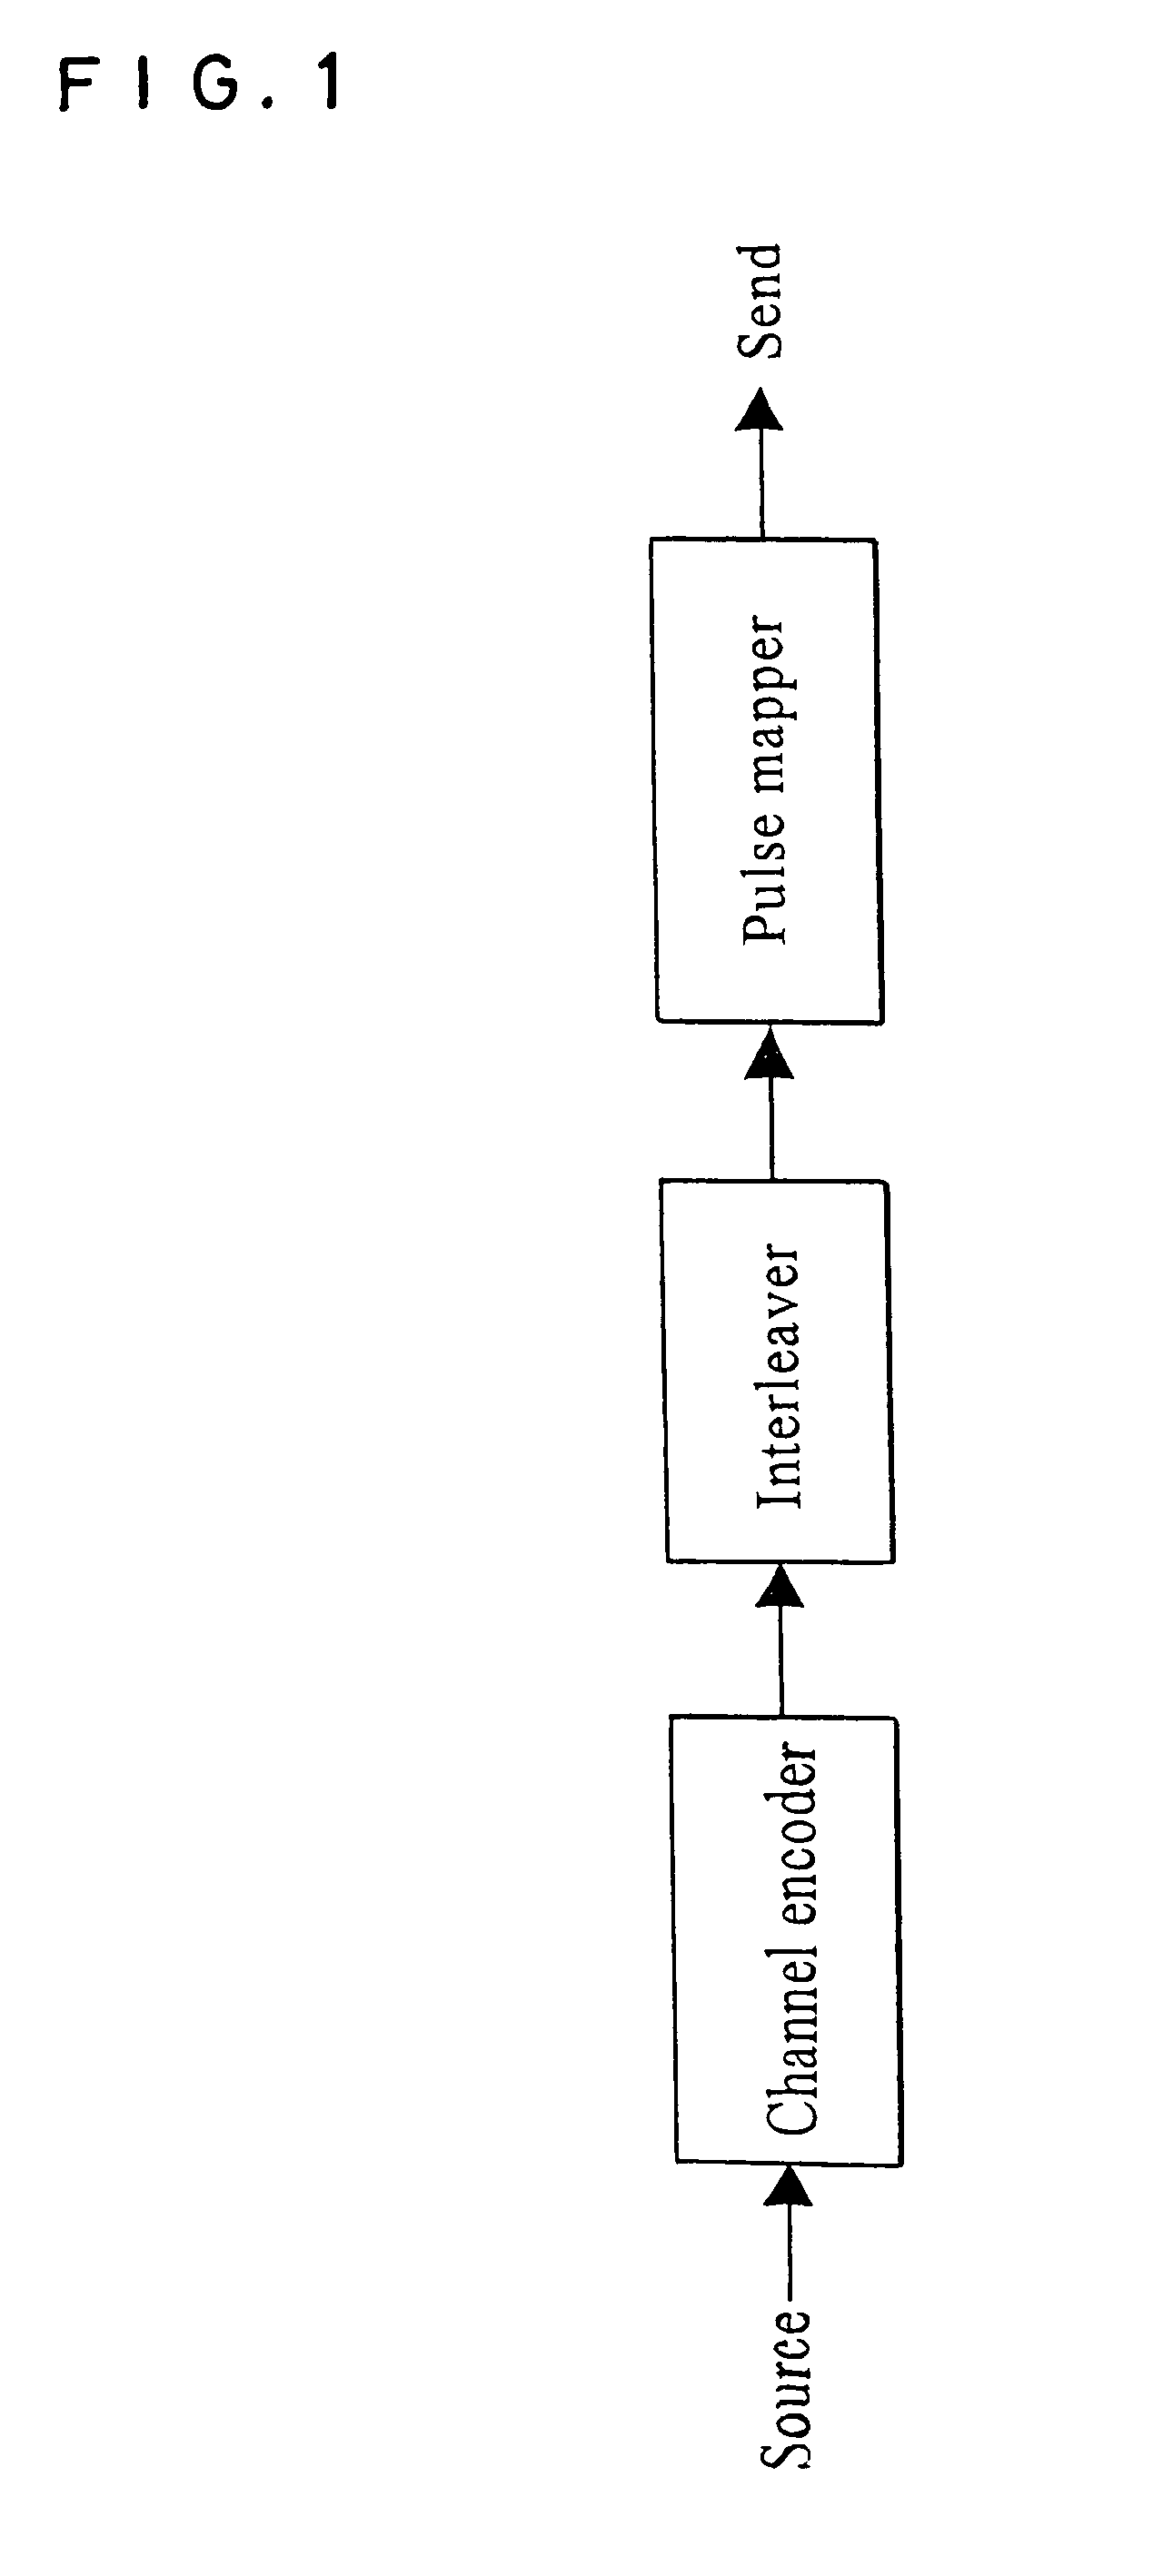 Constitution of a receiver in an ultra-wideband wireless communications system